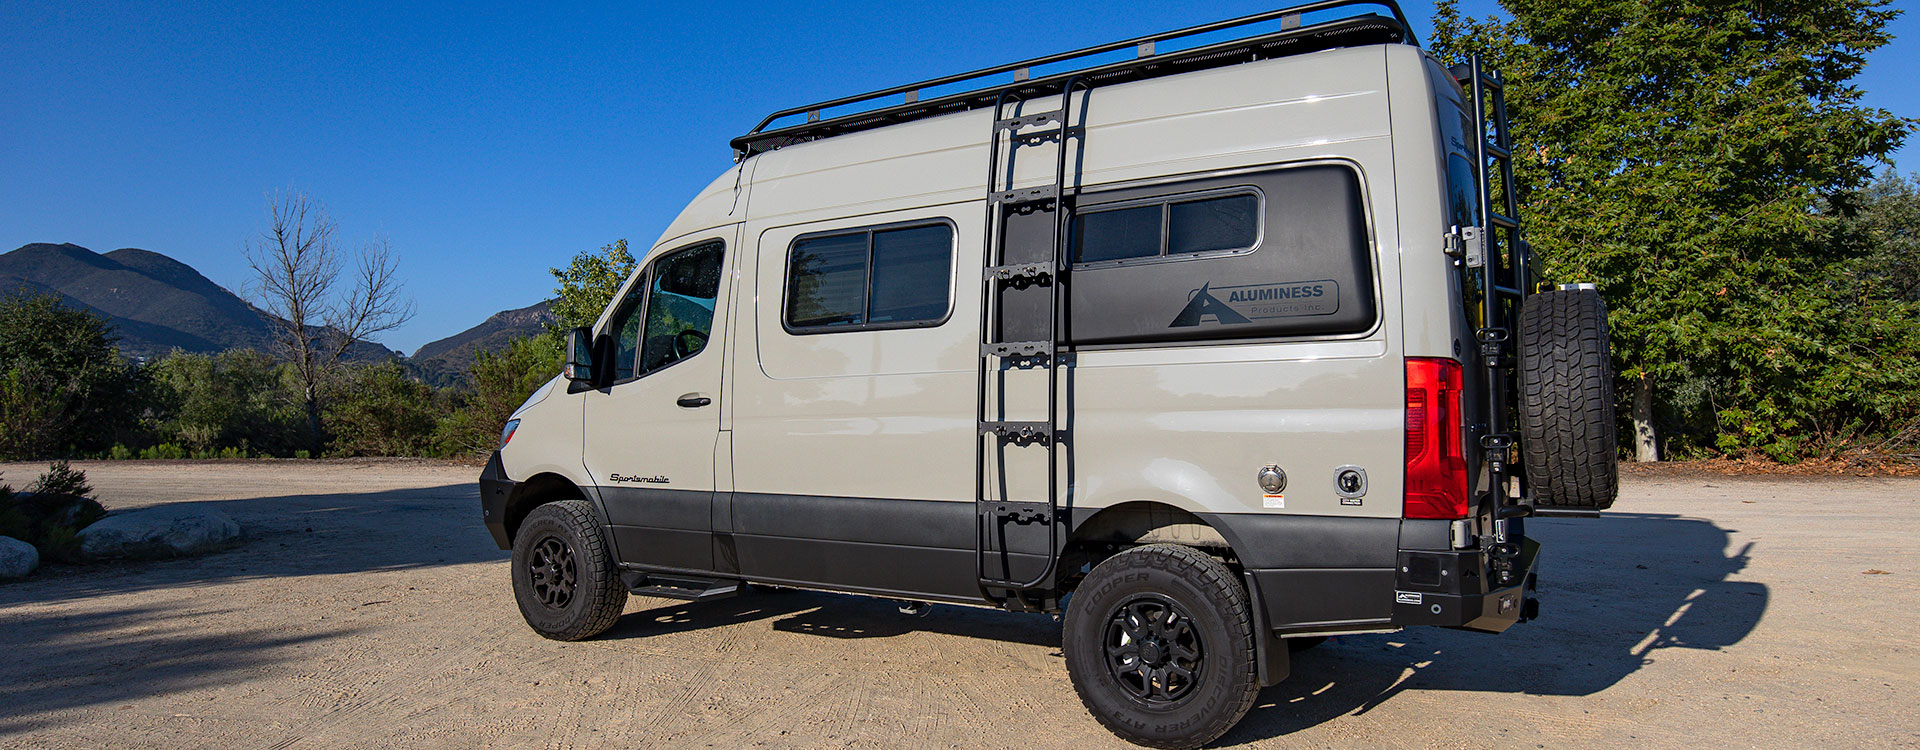 Sprinter van with the Legacy Side Ladder from Aluminess Products